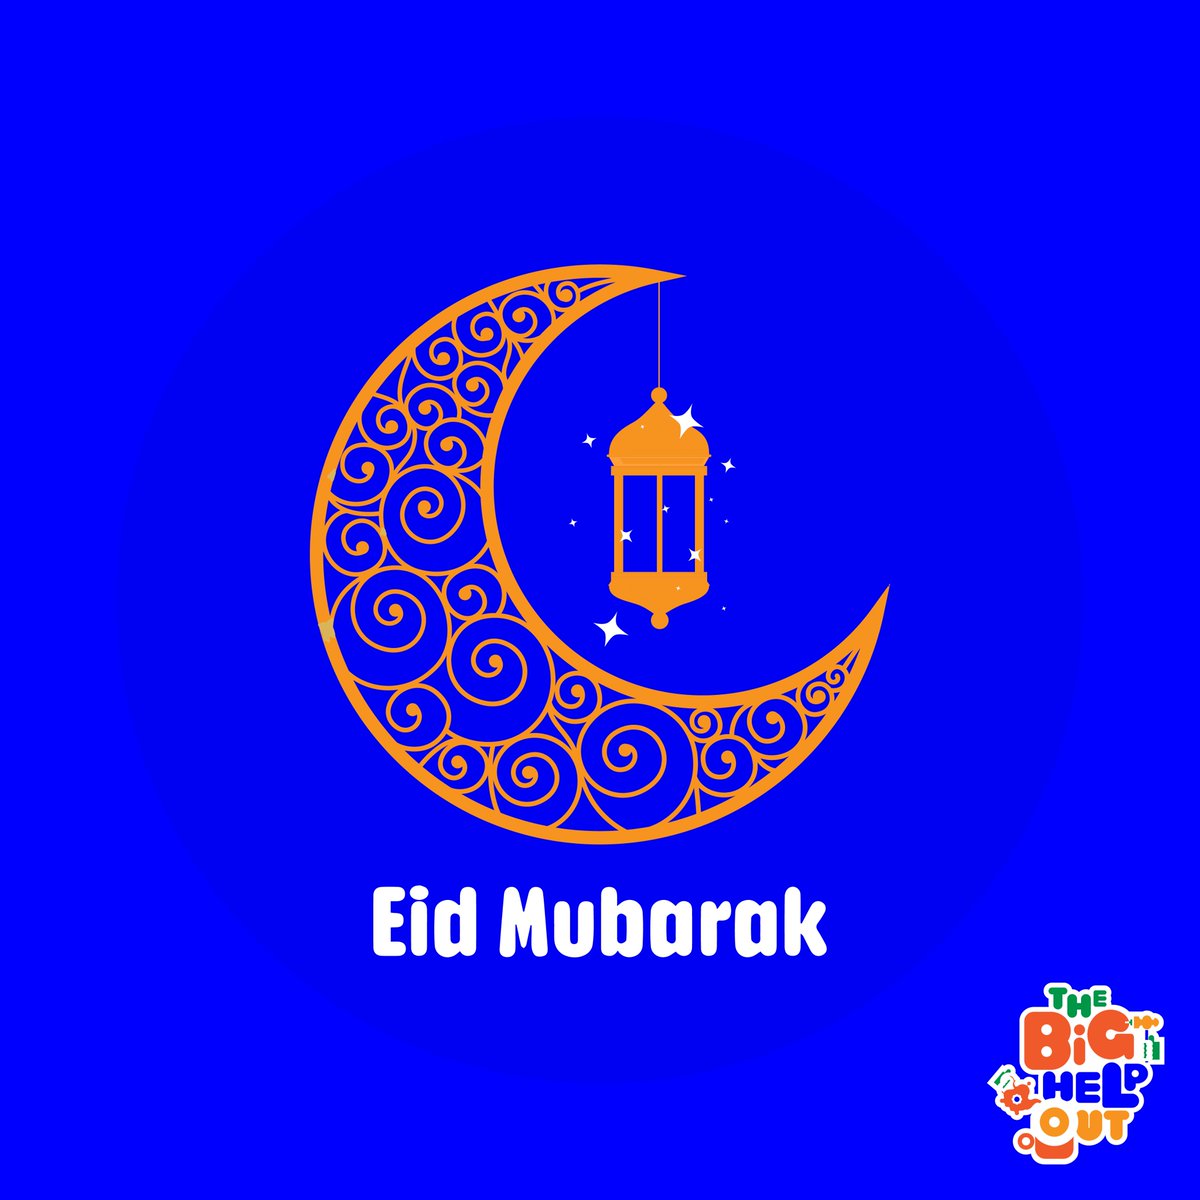 Eid Mubarak to everyone from the #BigHelpOut family! 🌙